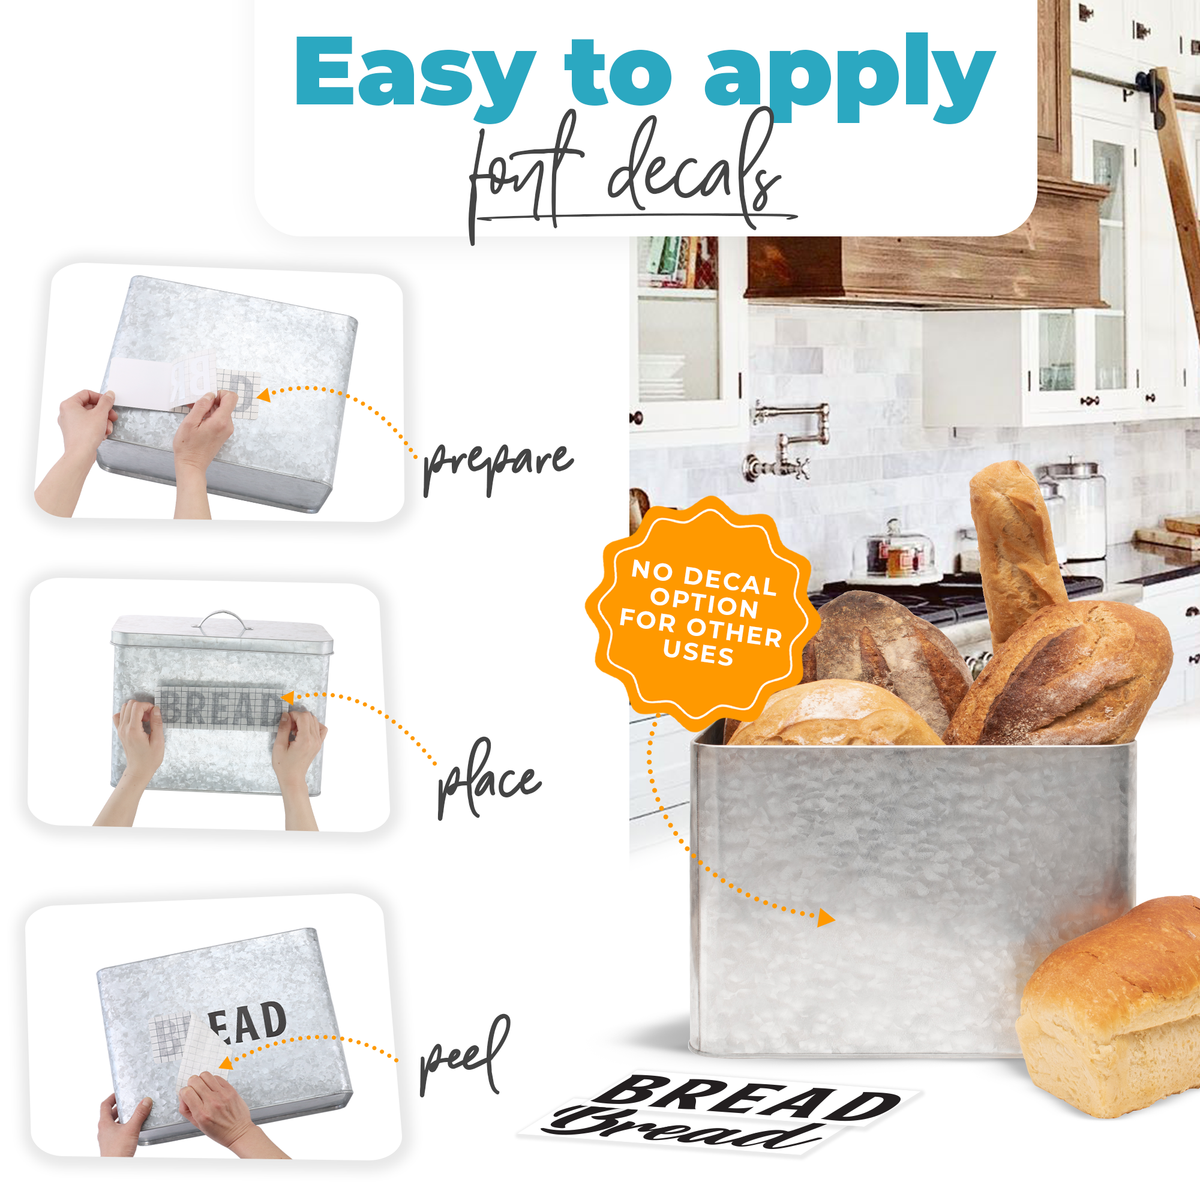 Easy steps to apply the font decals on the bread box